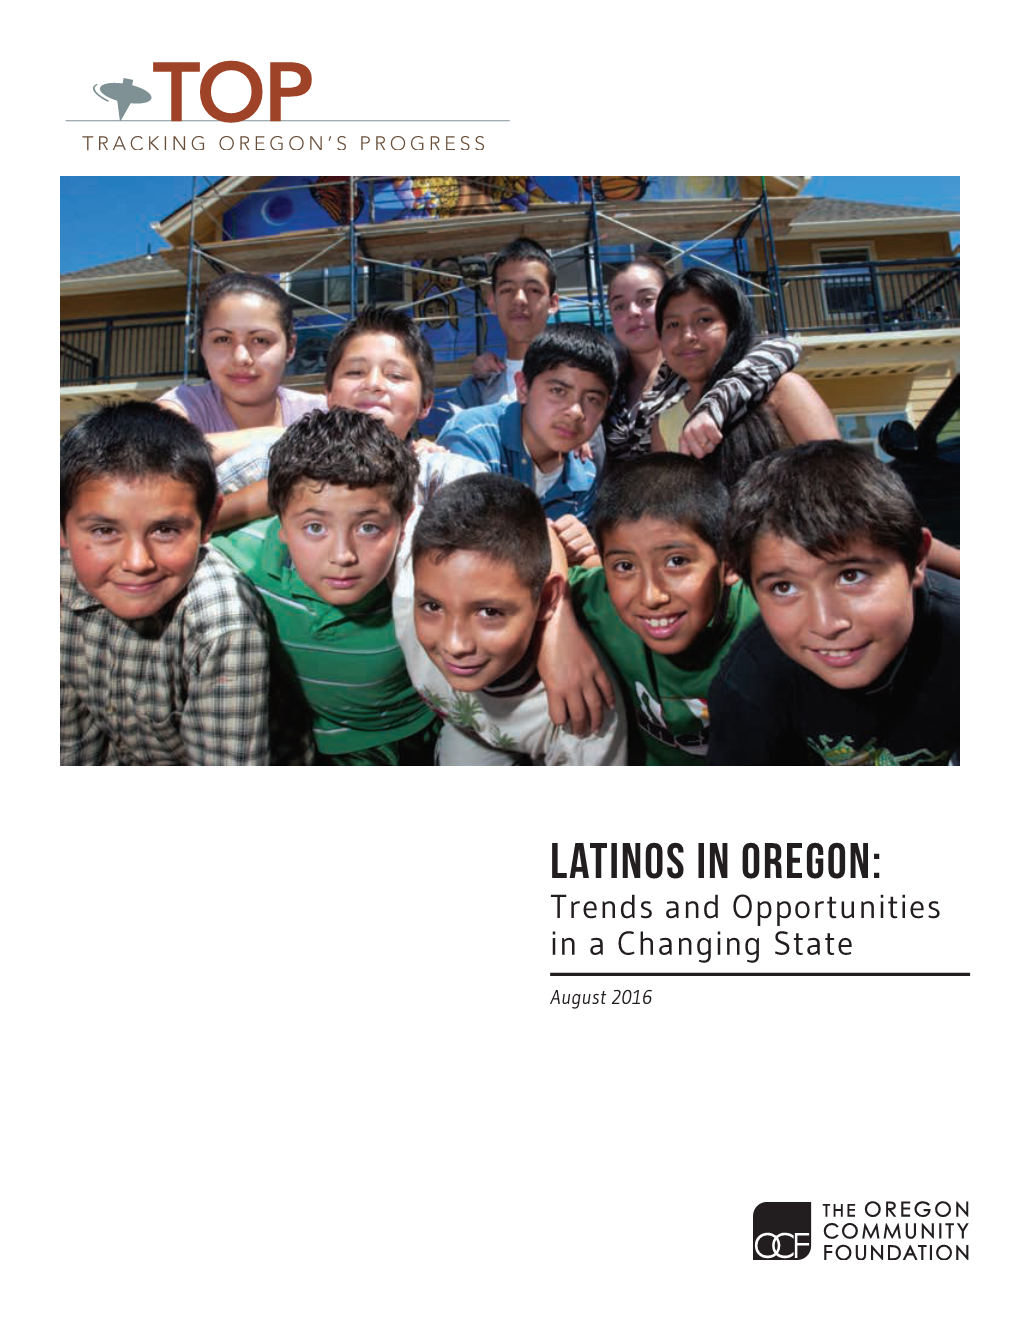 Latinos in Oregon: Trends and Opportunities in a Changing State